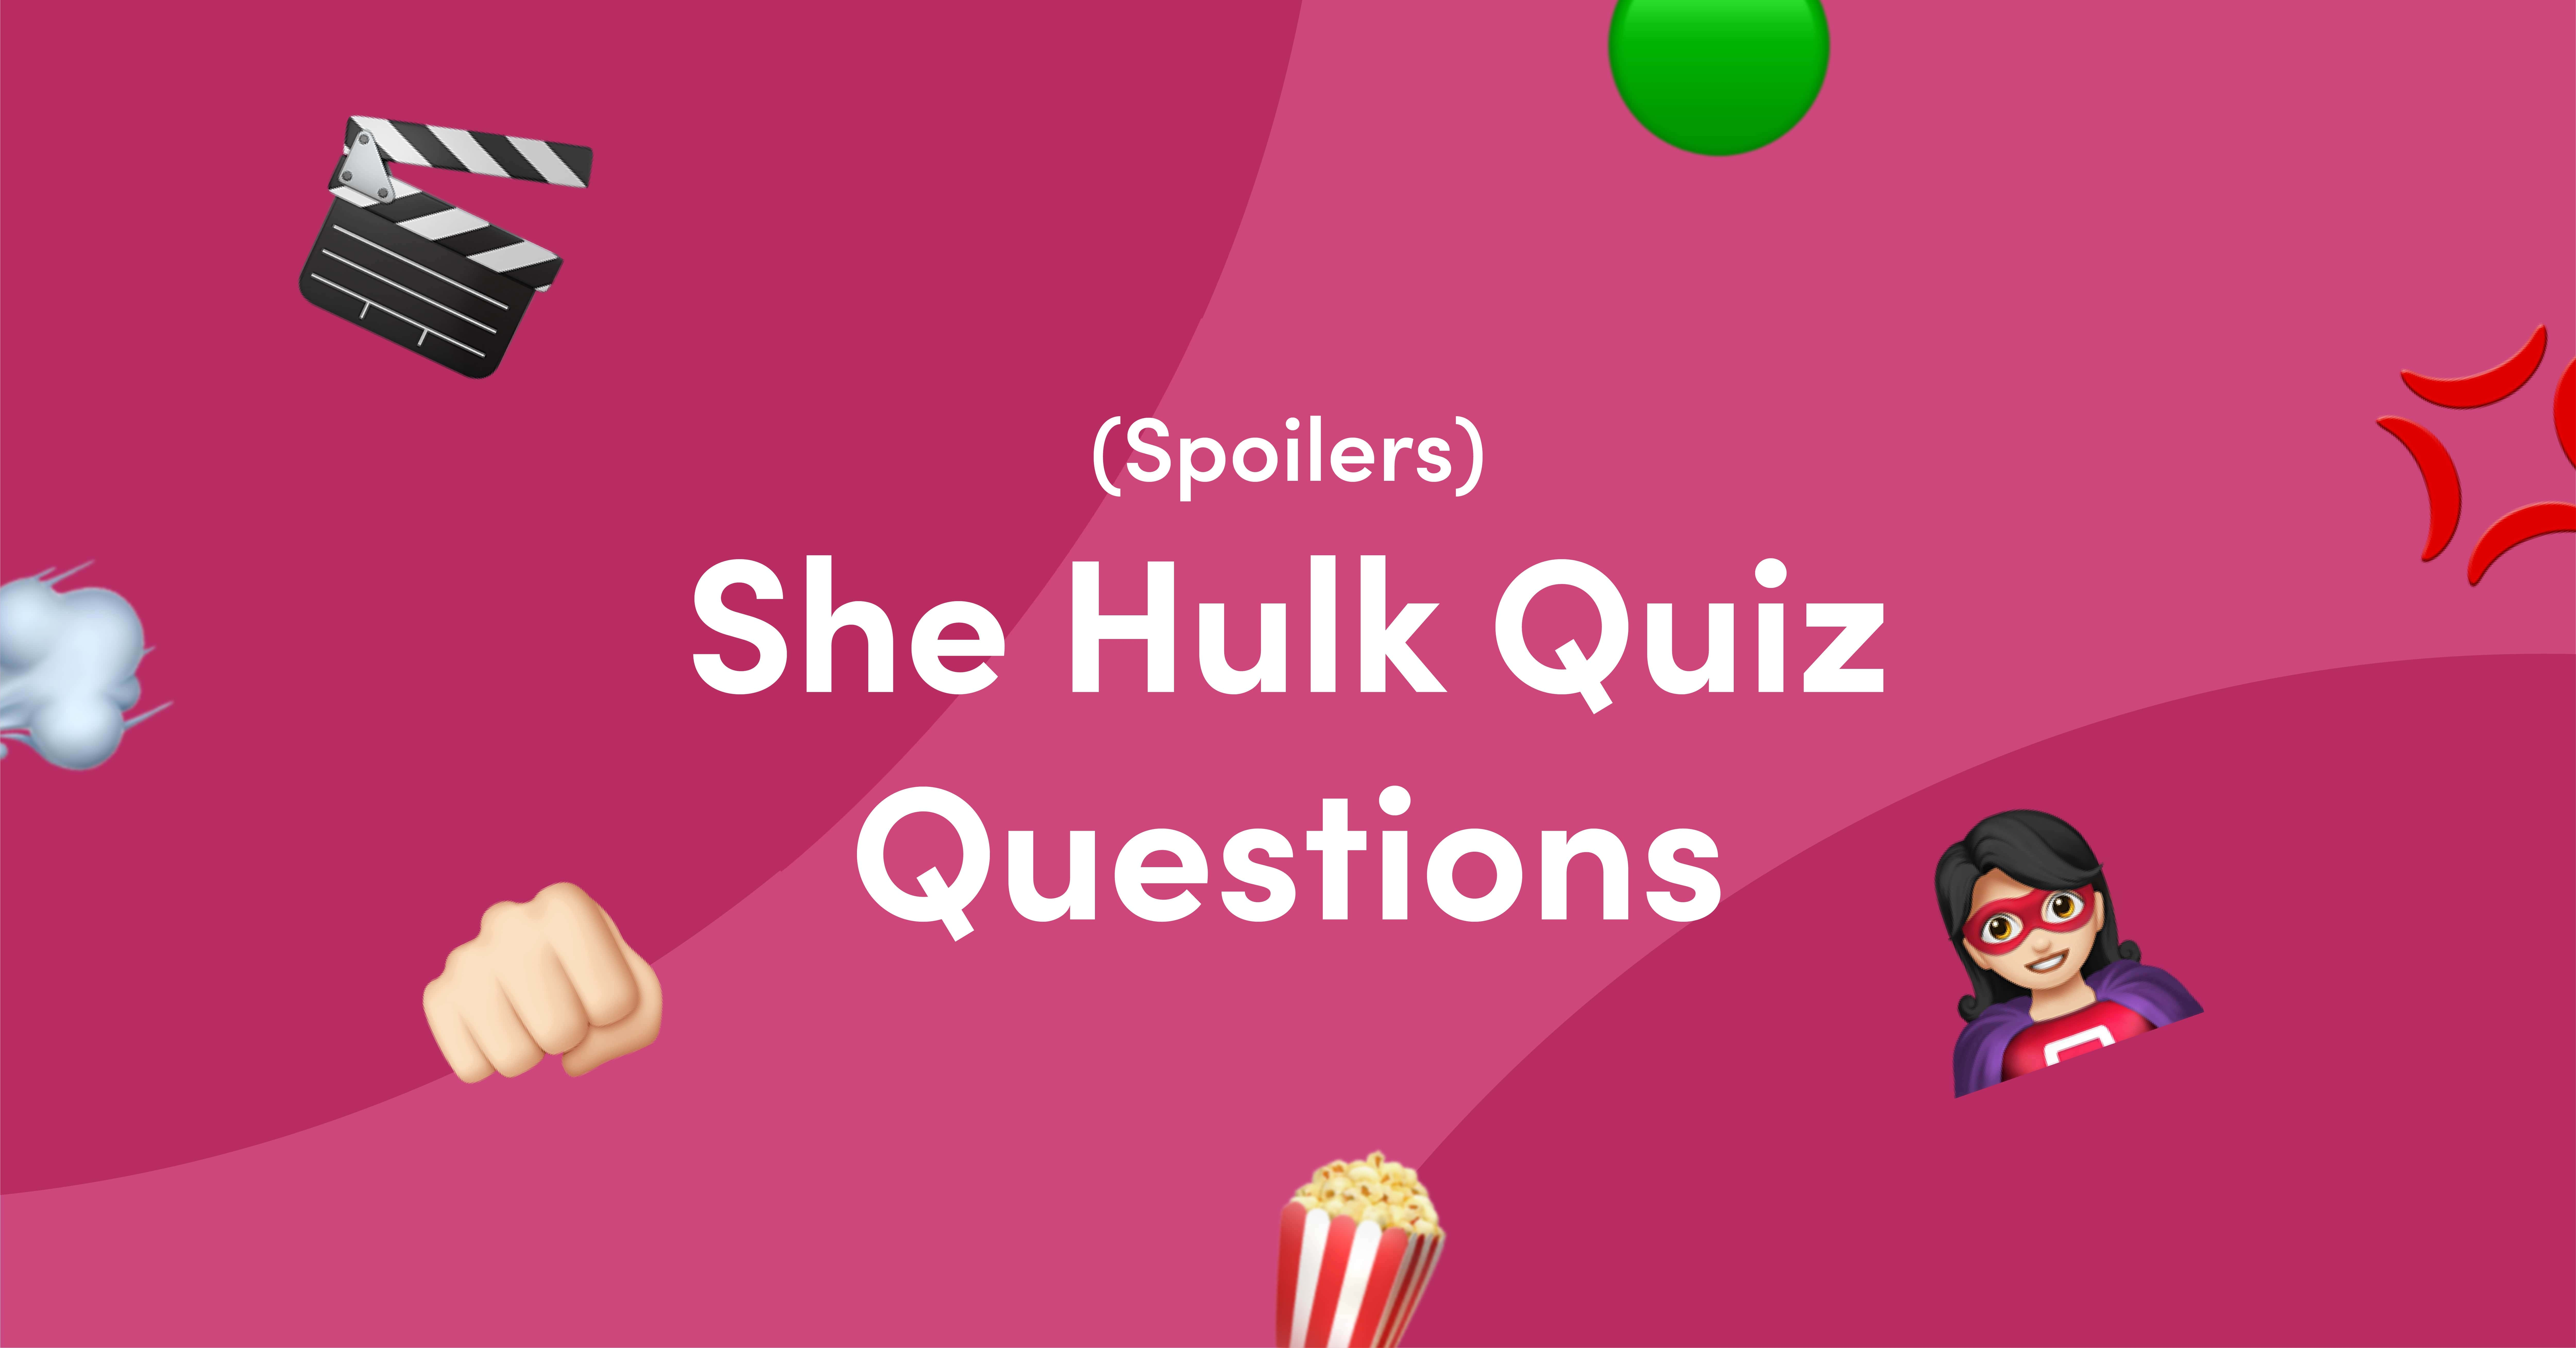 Emojis on pink background for She-Hulk quiz questions and answers